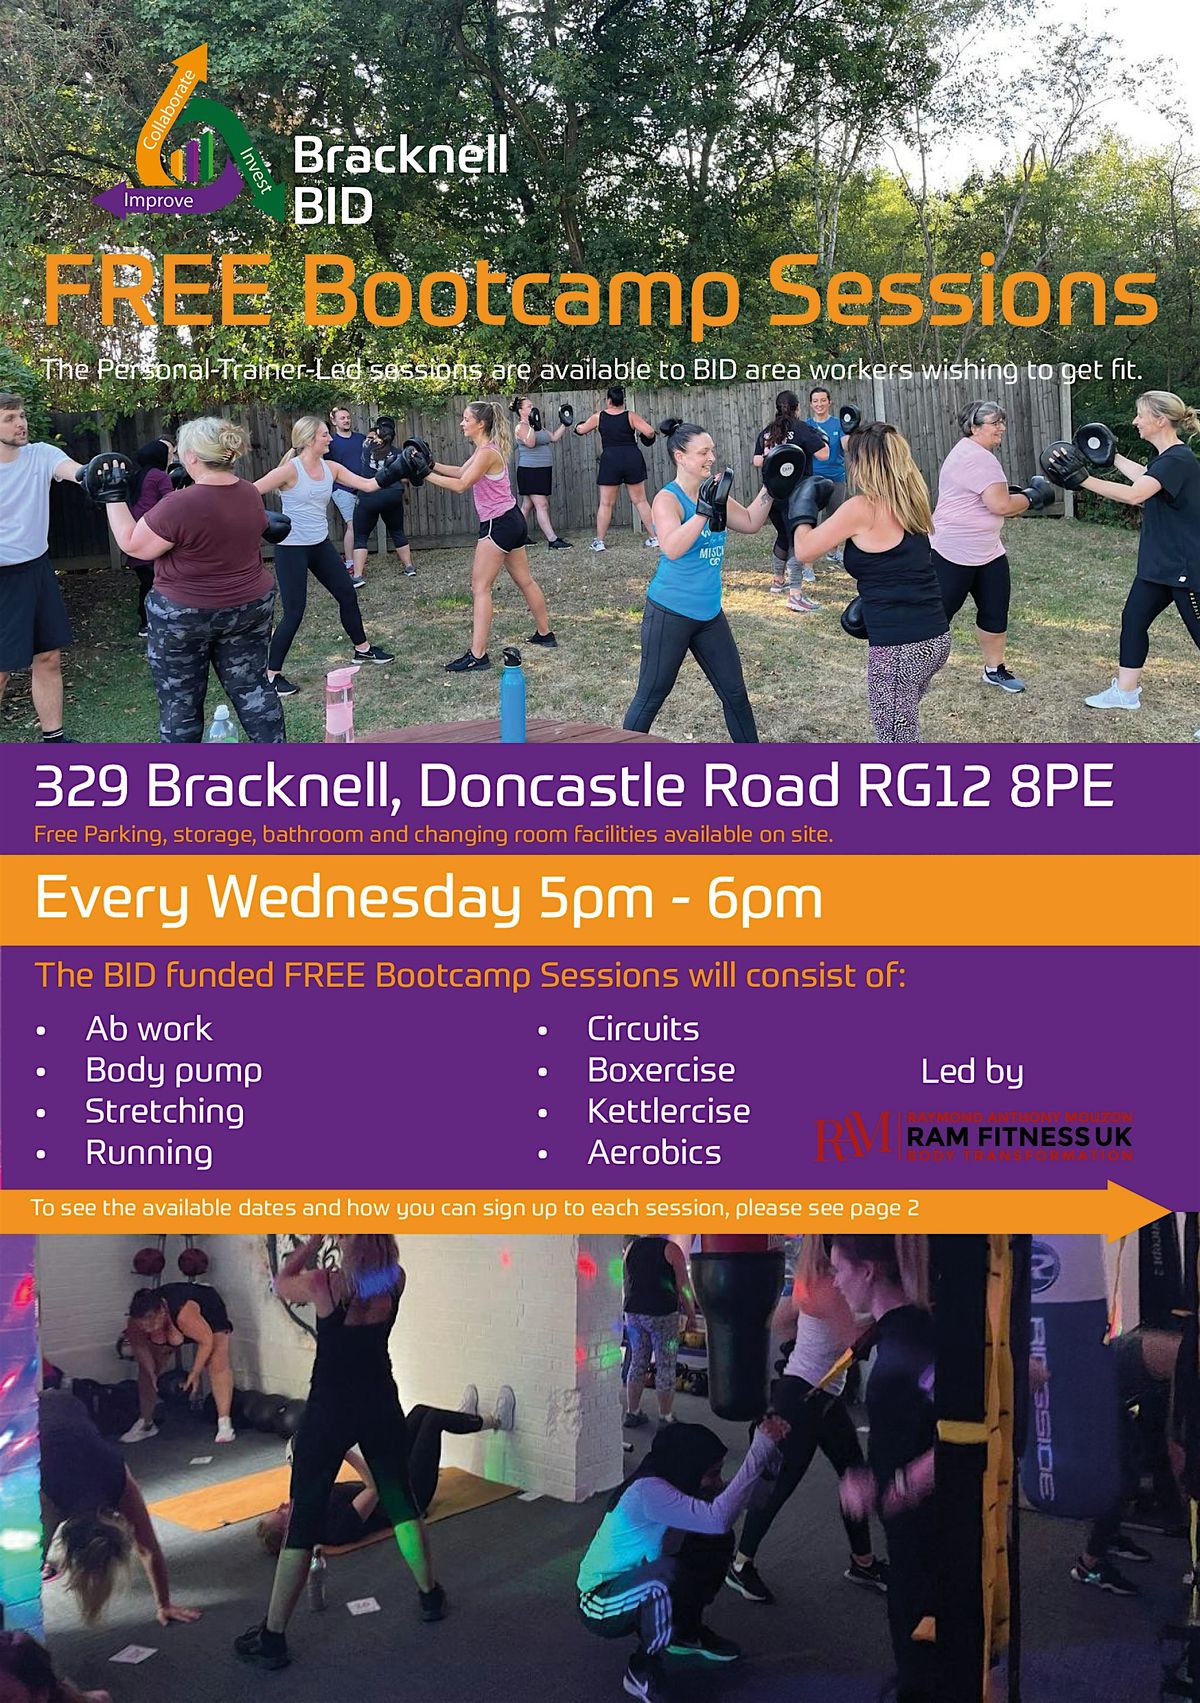 FREE Bootcamp Sessions | Personal-Trainer-led | Week 100